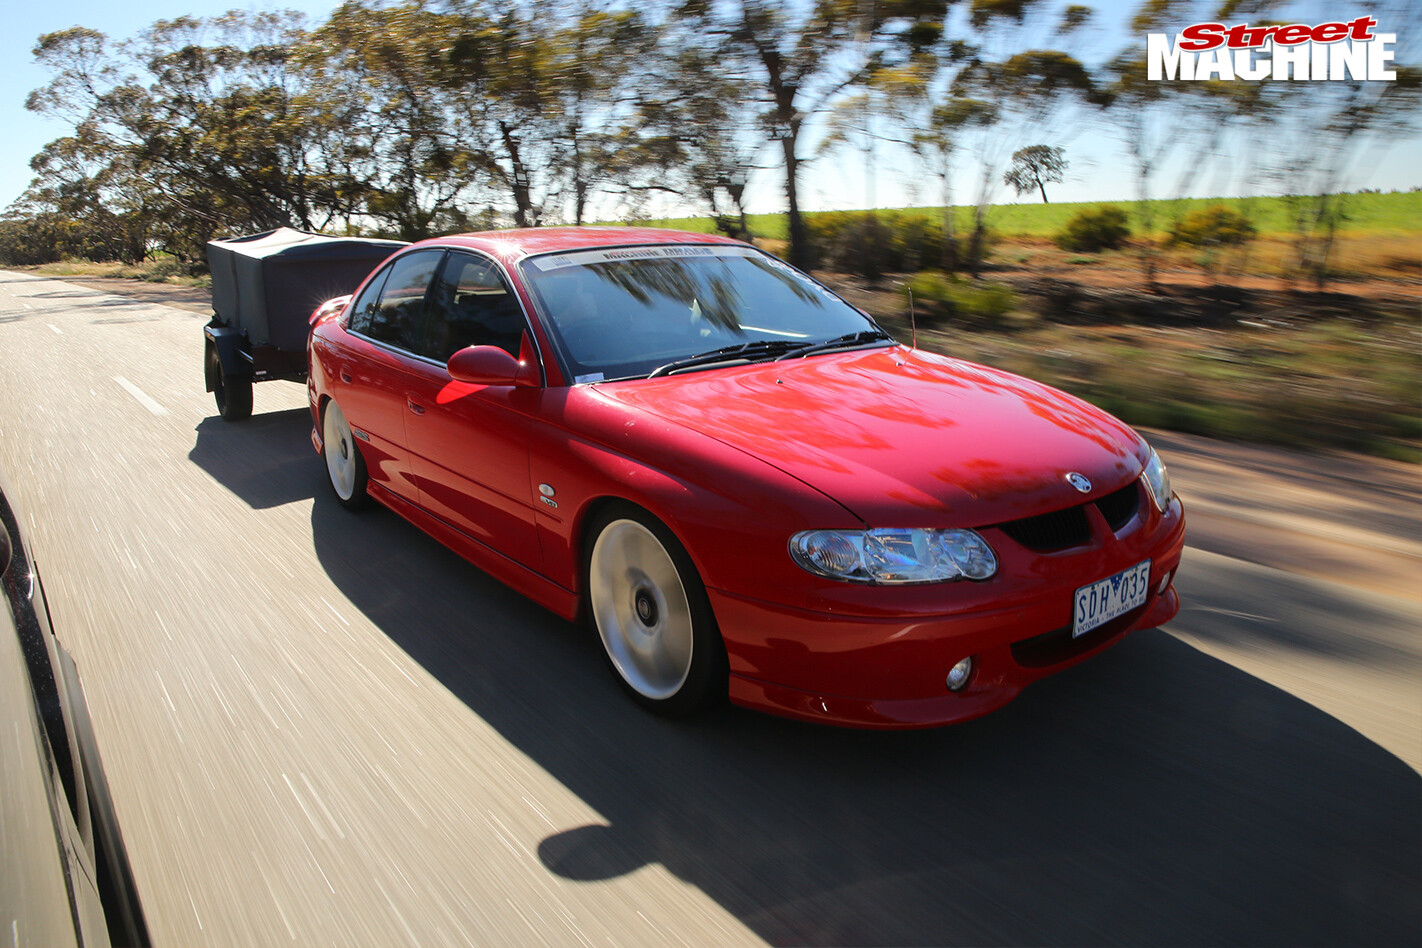 Holden -vx -commodore -ss -drag -challenge -onroad